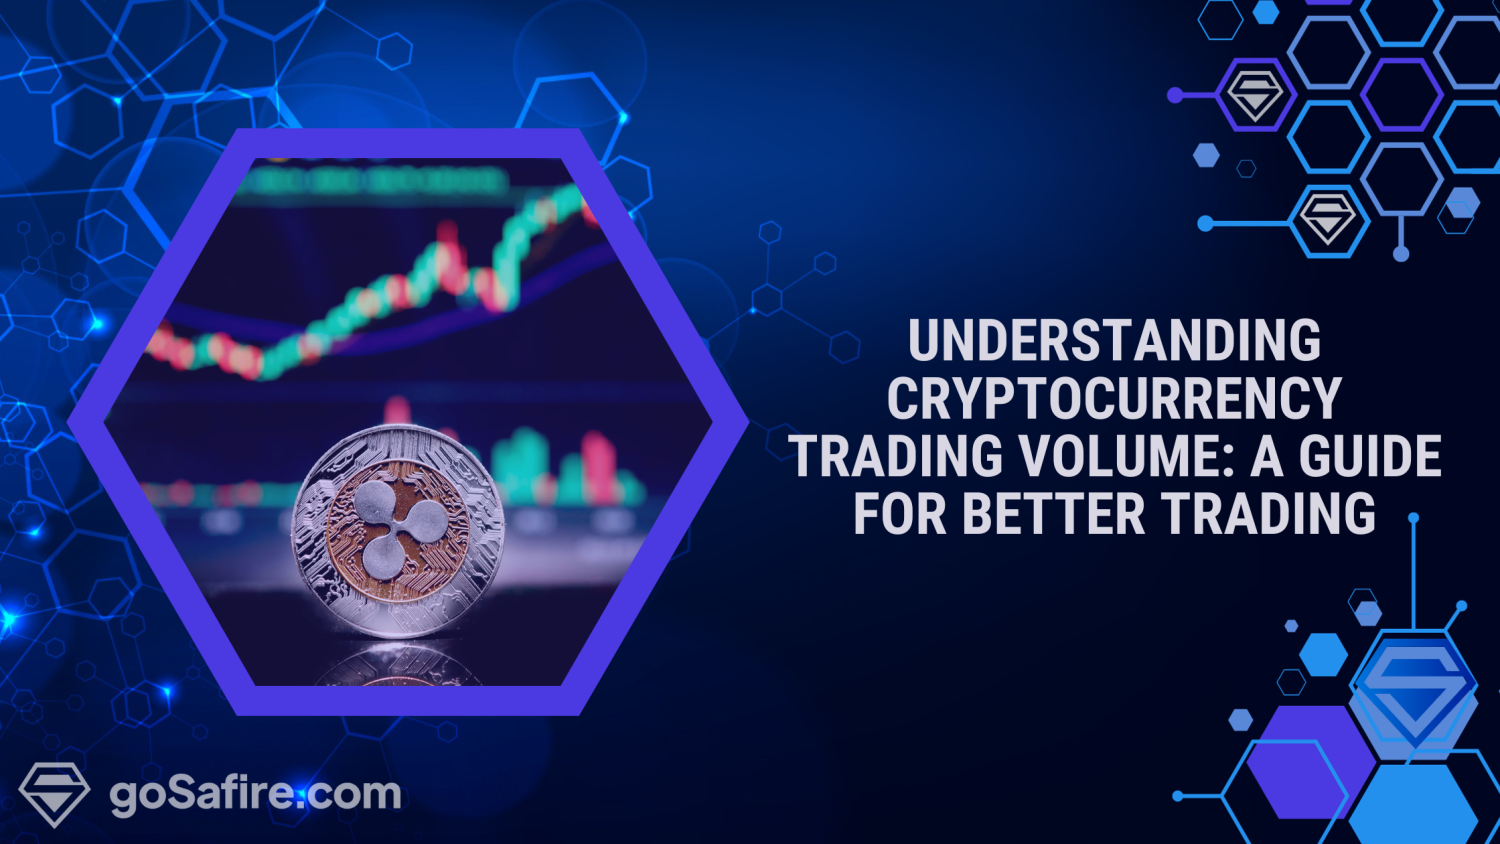 Understanding Cryptocurrency Trading Volume: A Guide for Better Trading